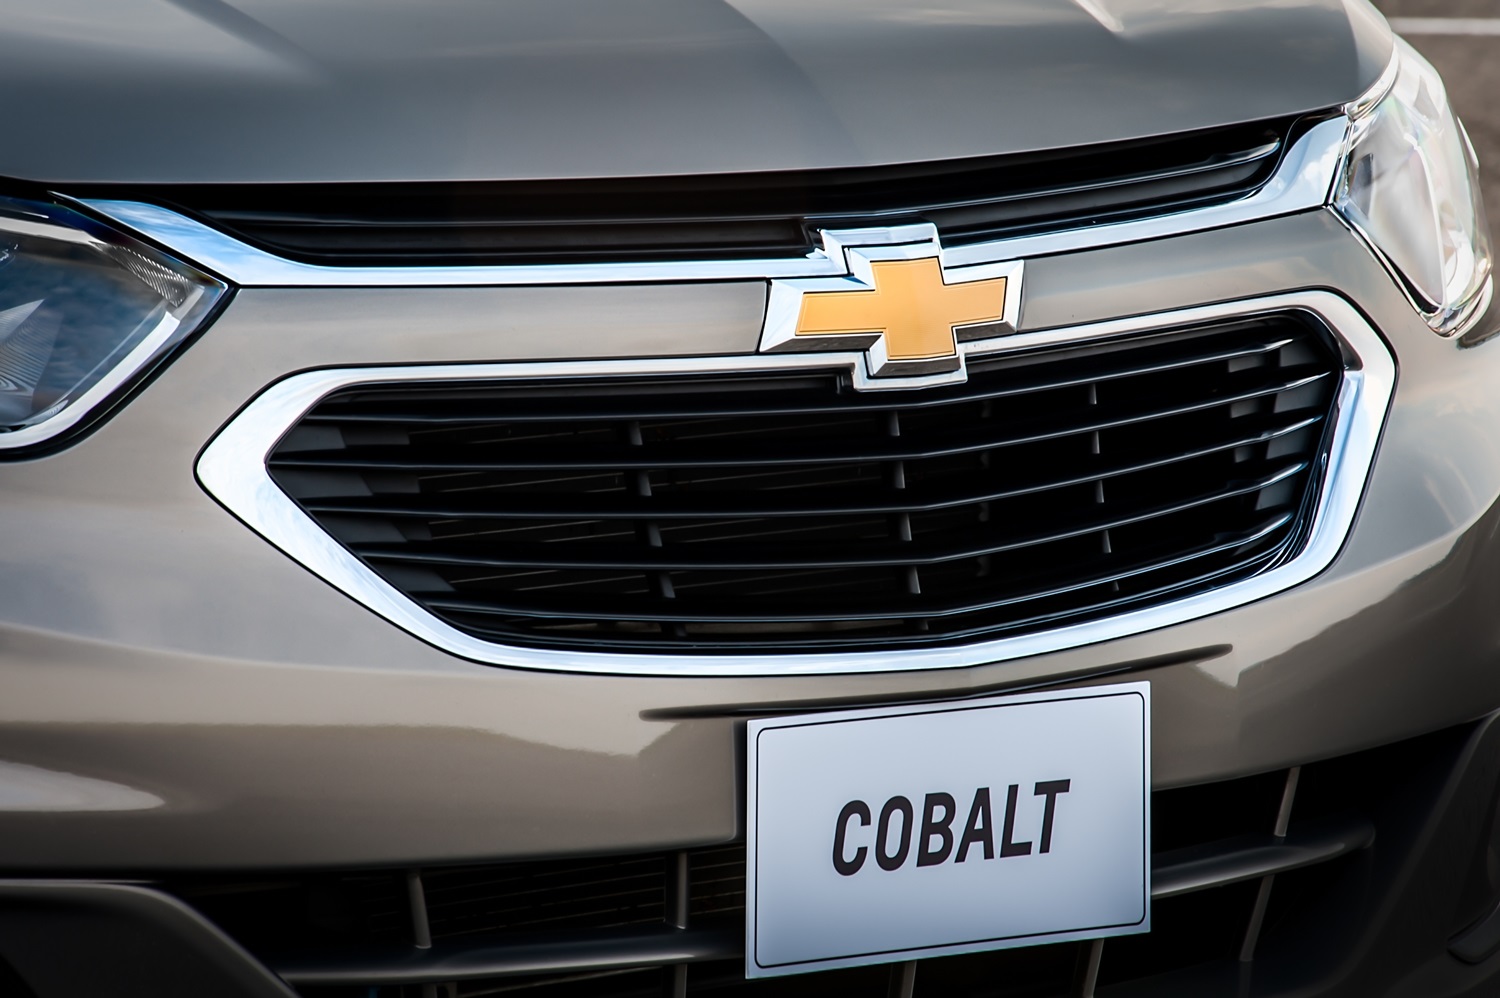 GM Launches 2020 Chevrolet Cobalt In Brazil | GM Authority